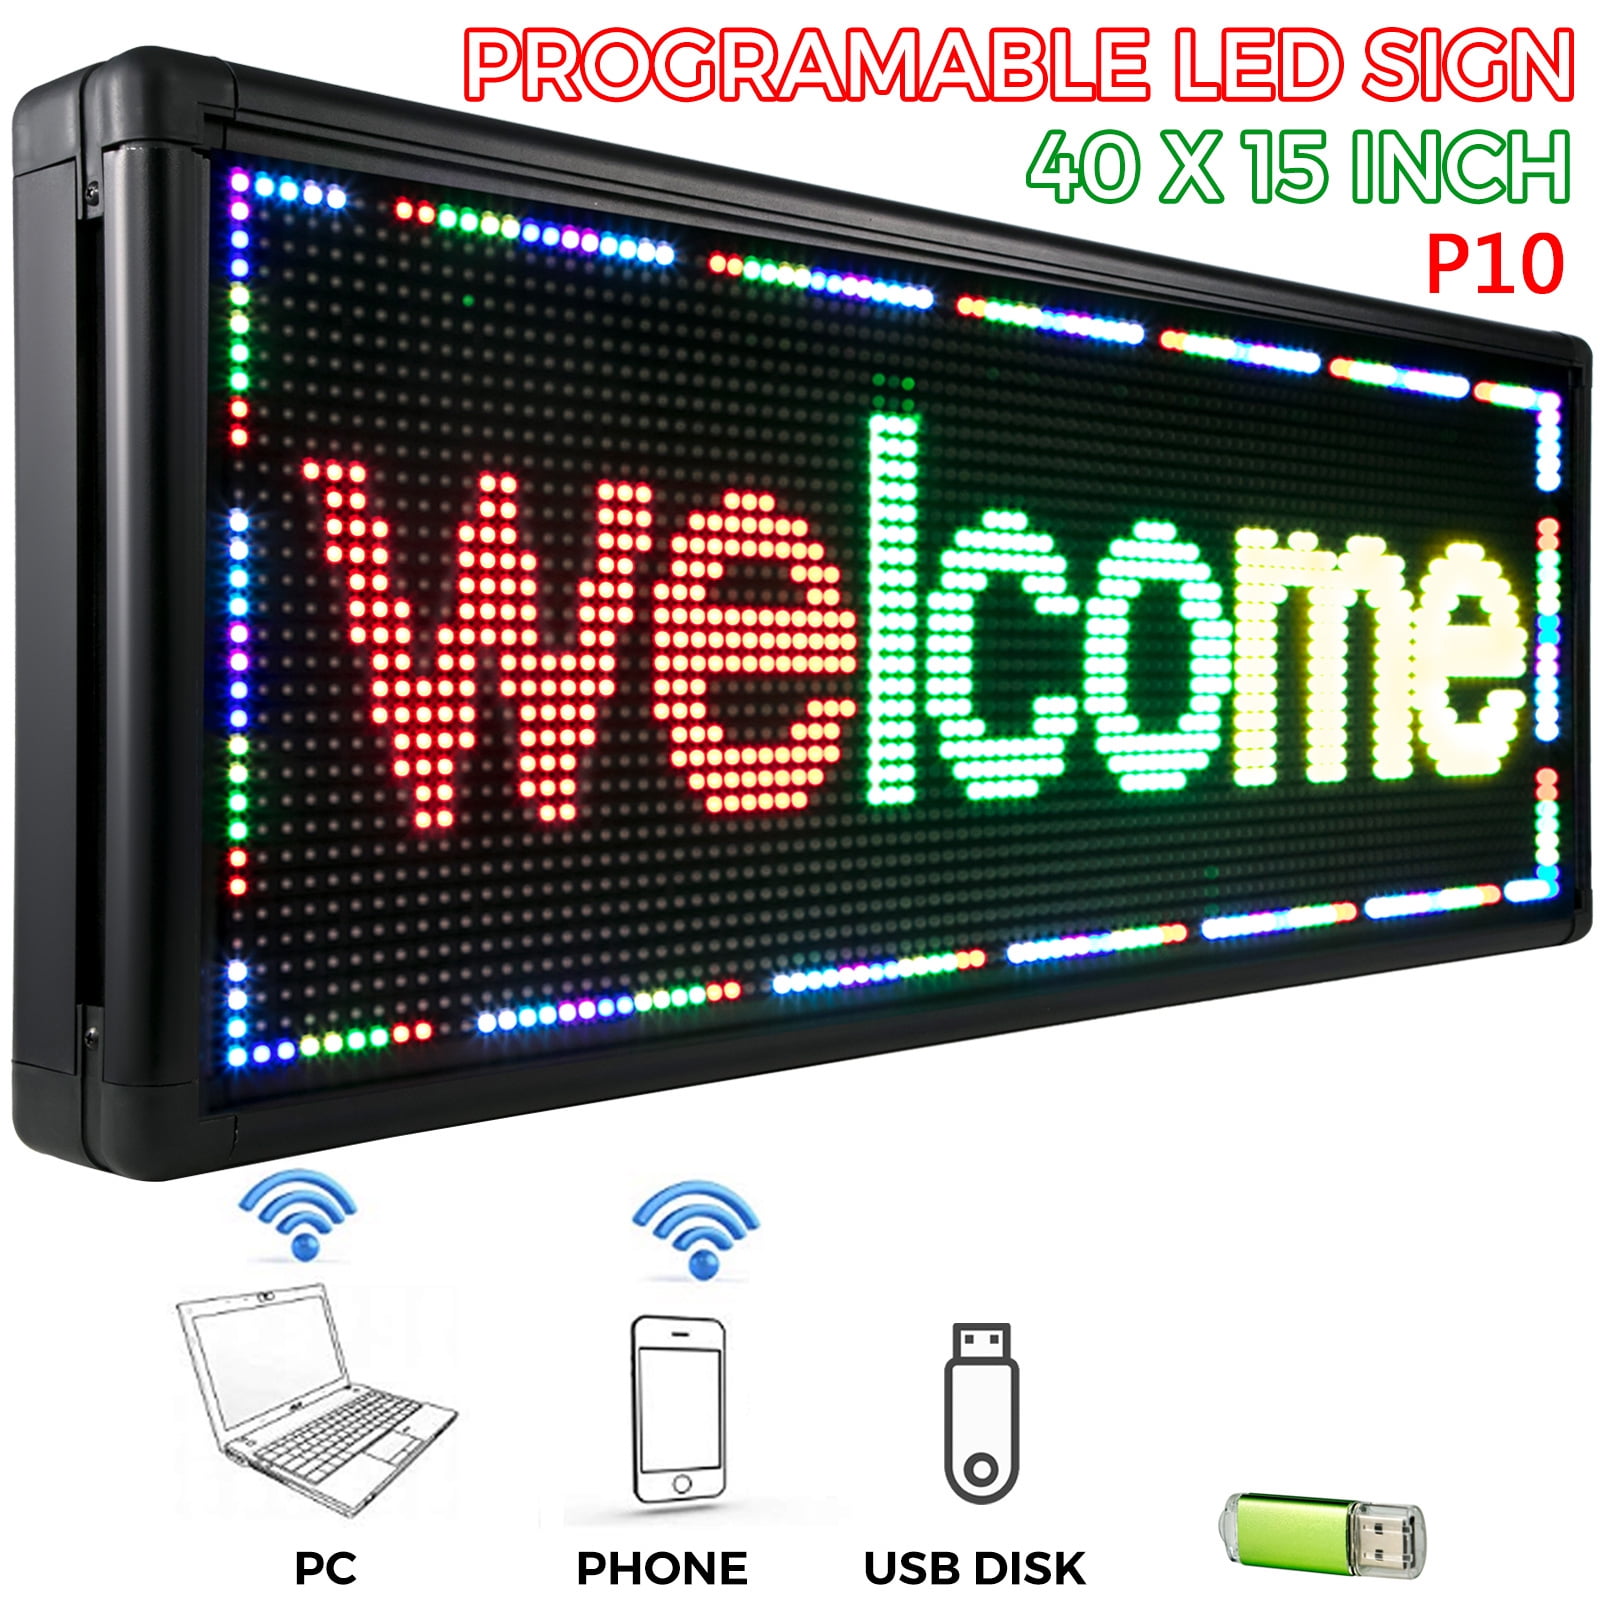 VEVOR Led Sign 40" x 15" Digital Sign Full Color Color with high Resolution P10 Led Scrolling Display Programmable by PC & WiFi & USB for Advertising - Walmart.com